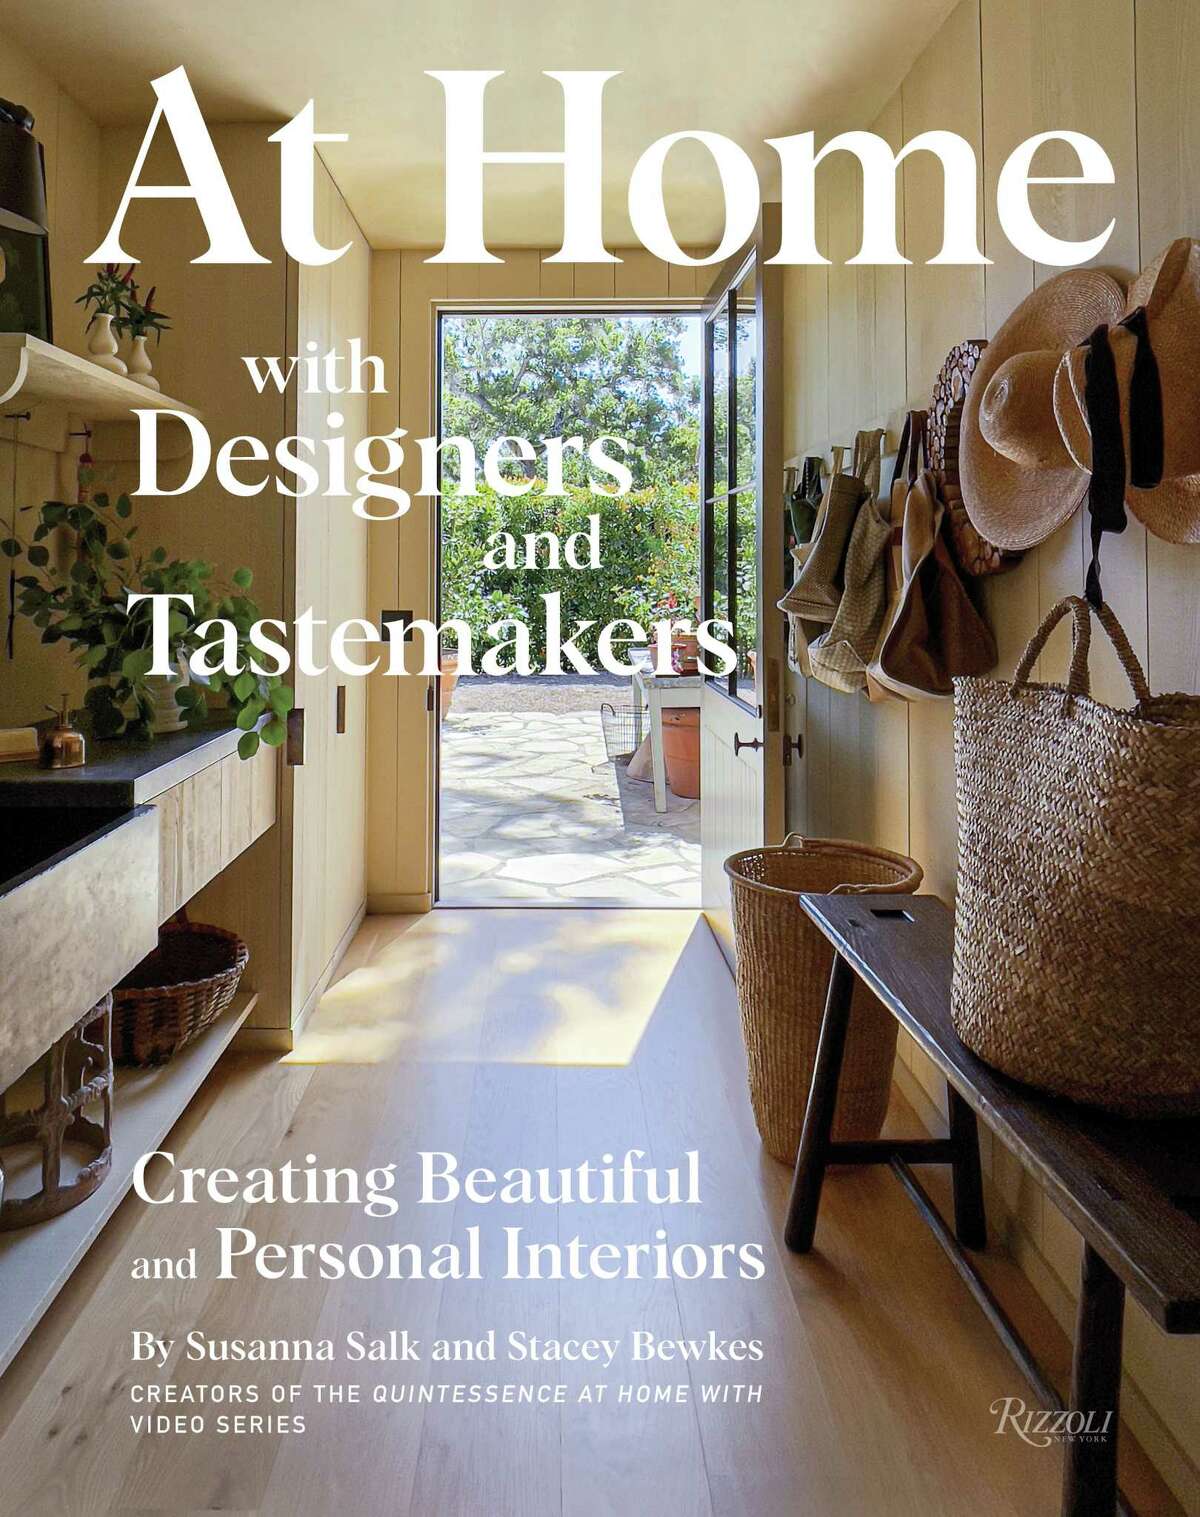 "At Home with Designers and Tastemakers: Creating Beautiful and Personal Interiors," by Susanna Salk and Stacey Bewkes.